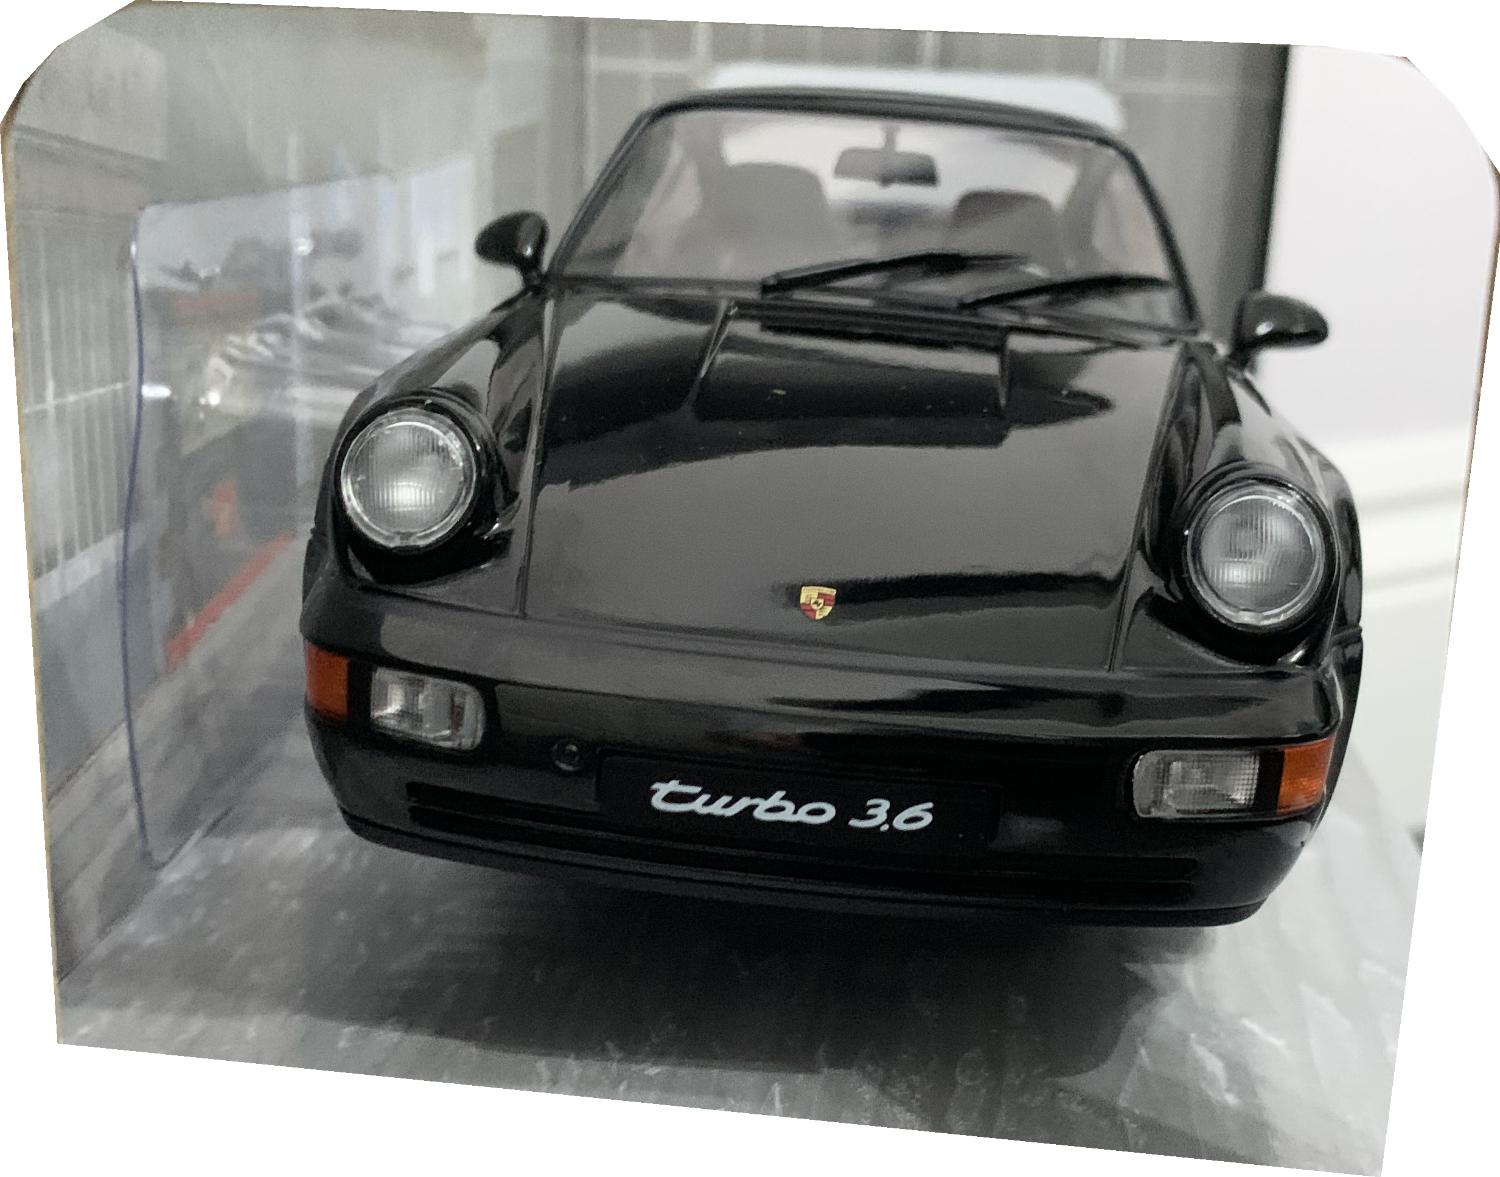 A very good representation of the Porsche 911 (964) Turbo decorated in black with rear spoiler, silver and chrome wheels.